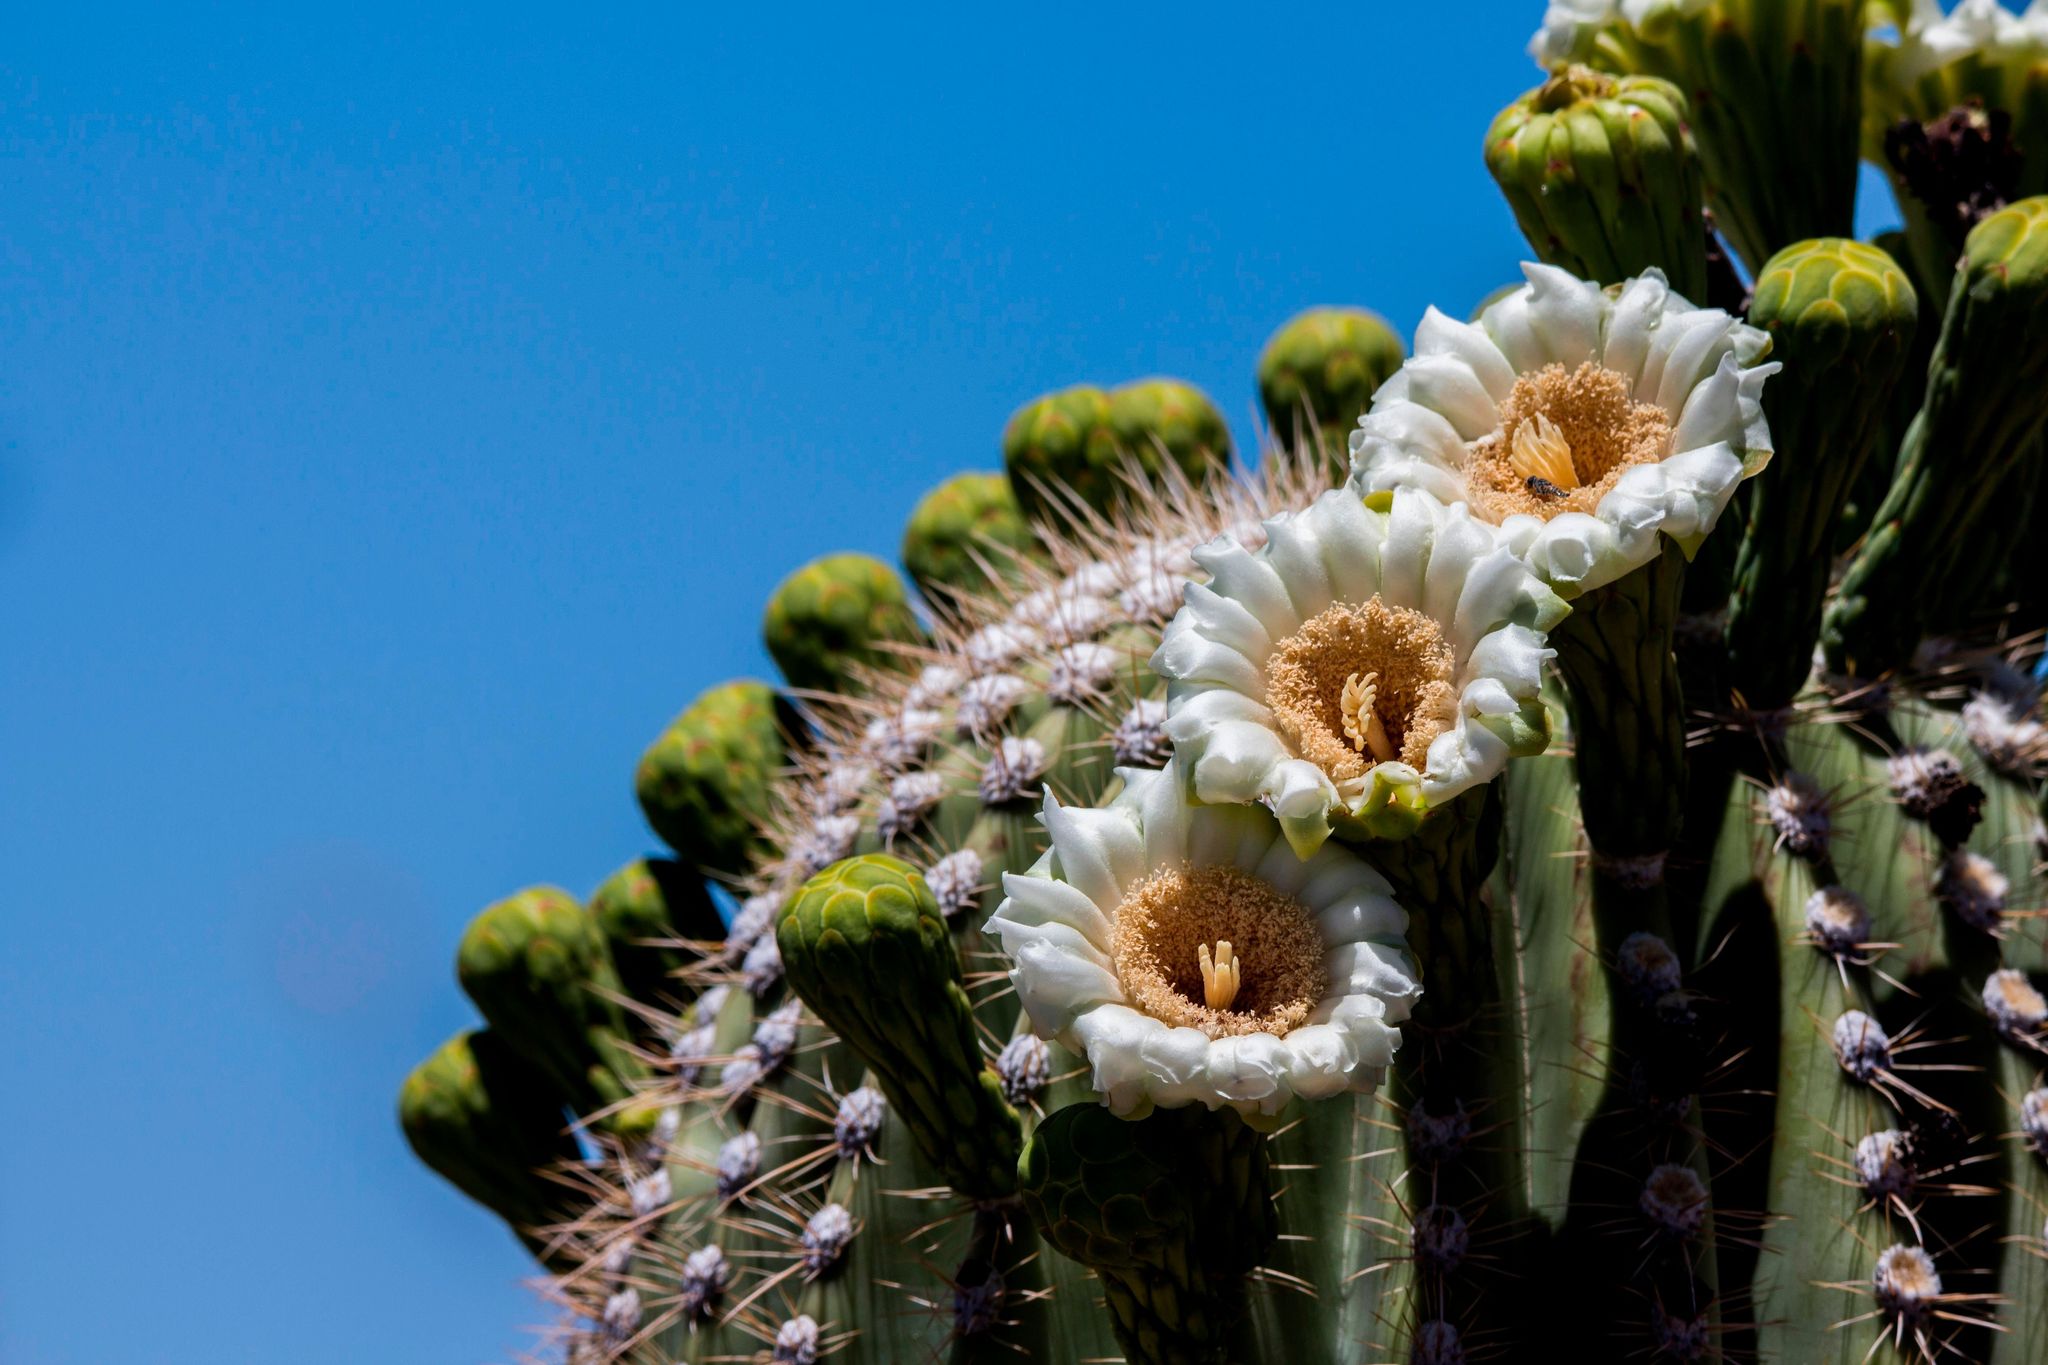 The flowering season in Saguaro National Park attracts visitors from all over the world.